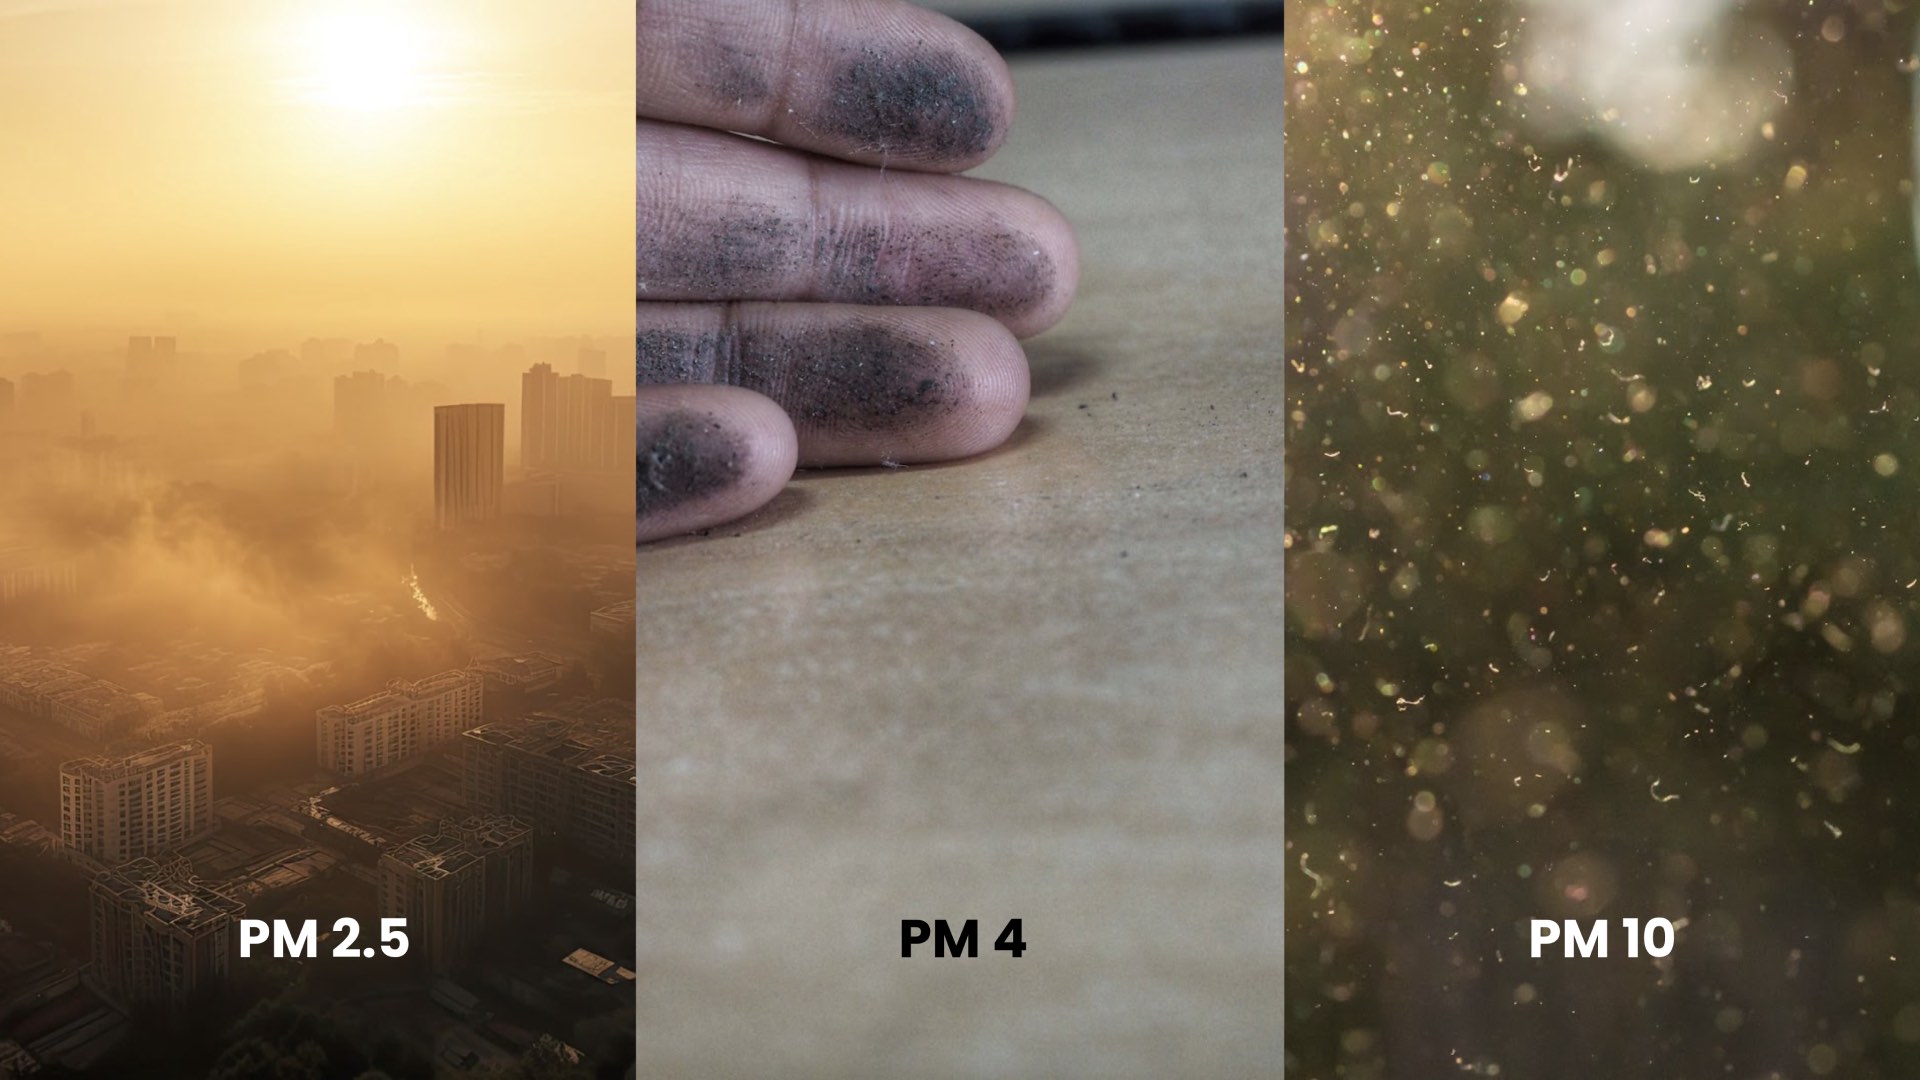 An image showing the difference between PM 4 and PM 10. 